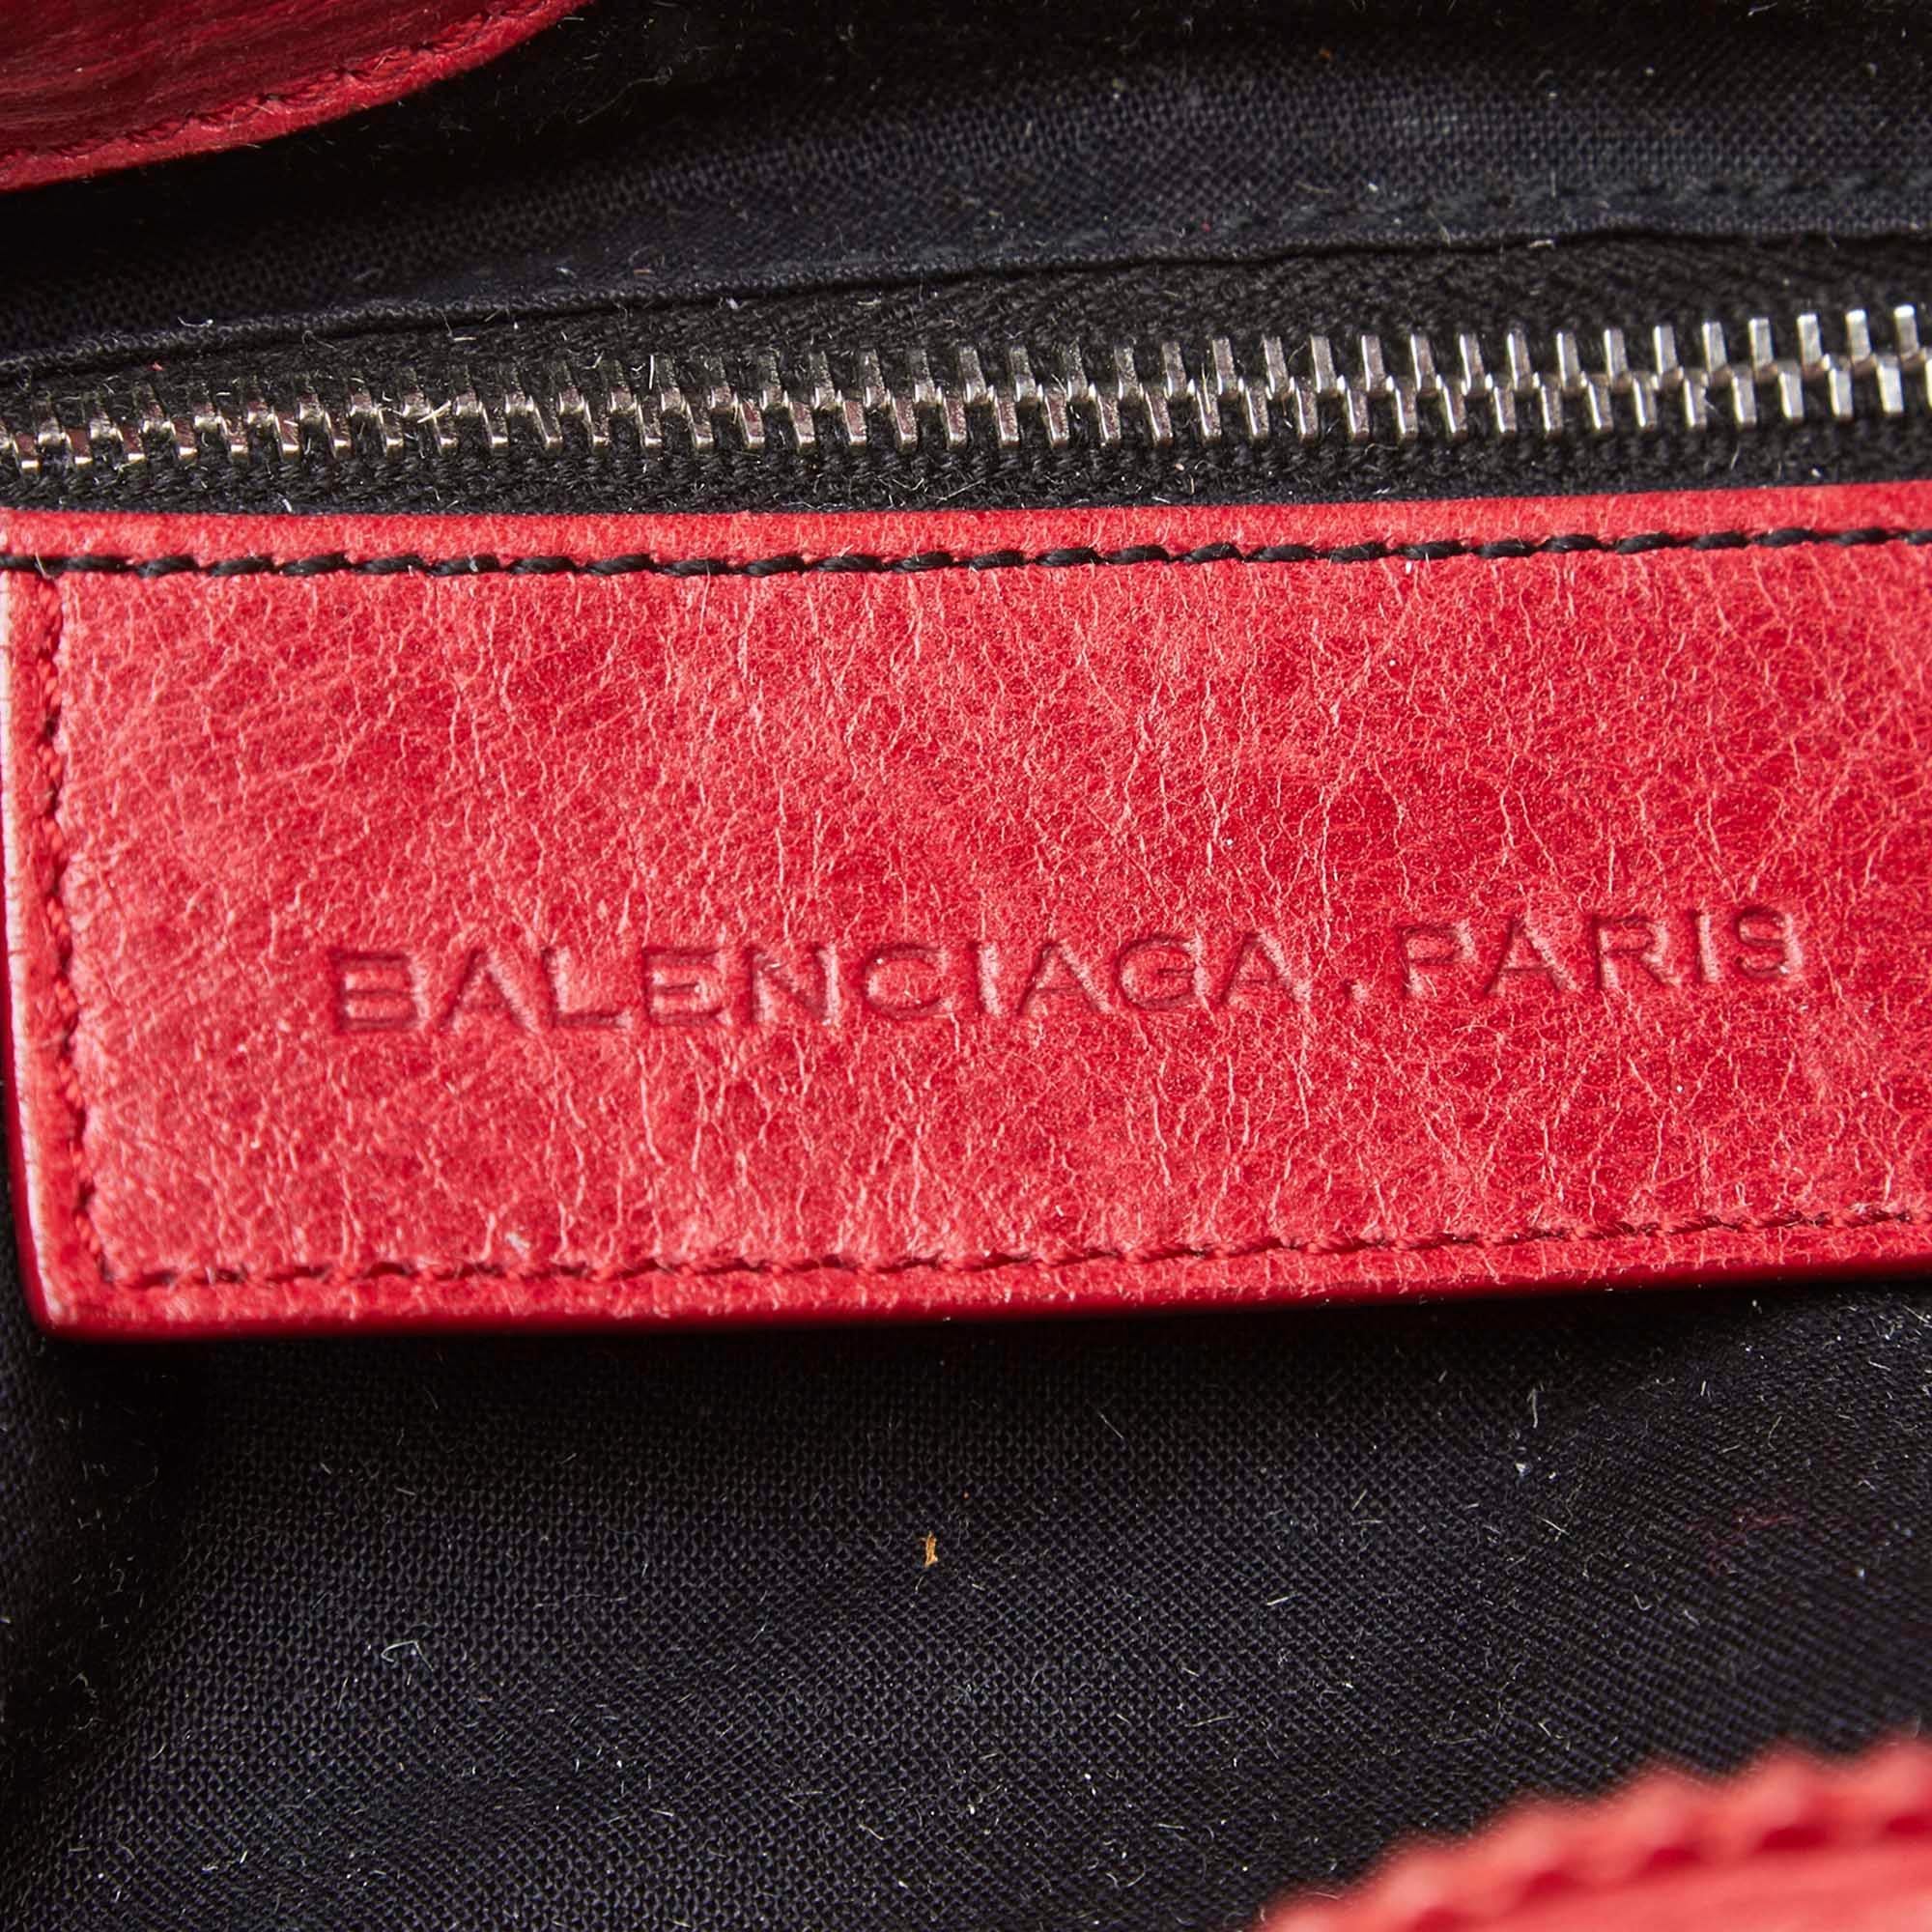 Red Vintage Authentic Balenciaga Leather Motocross Giant Brogues Work Bag LARGE 